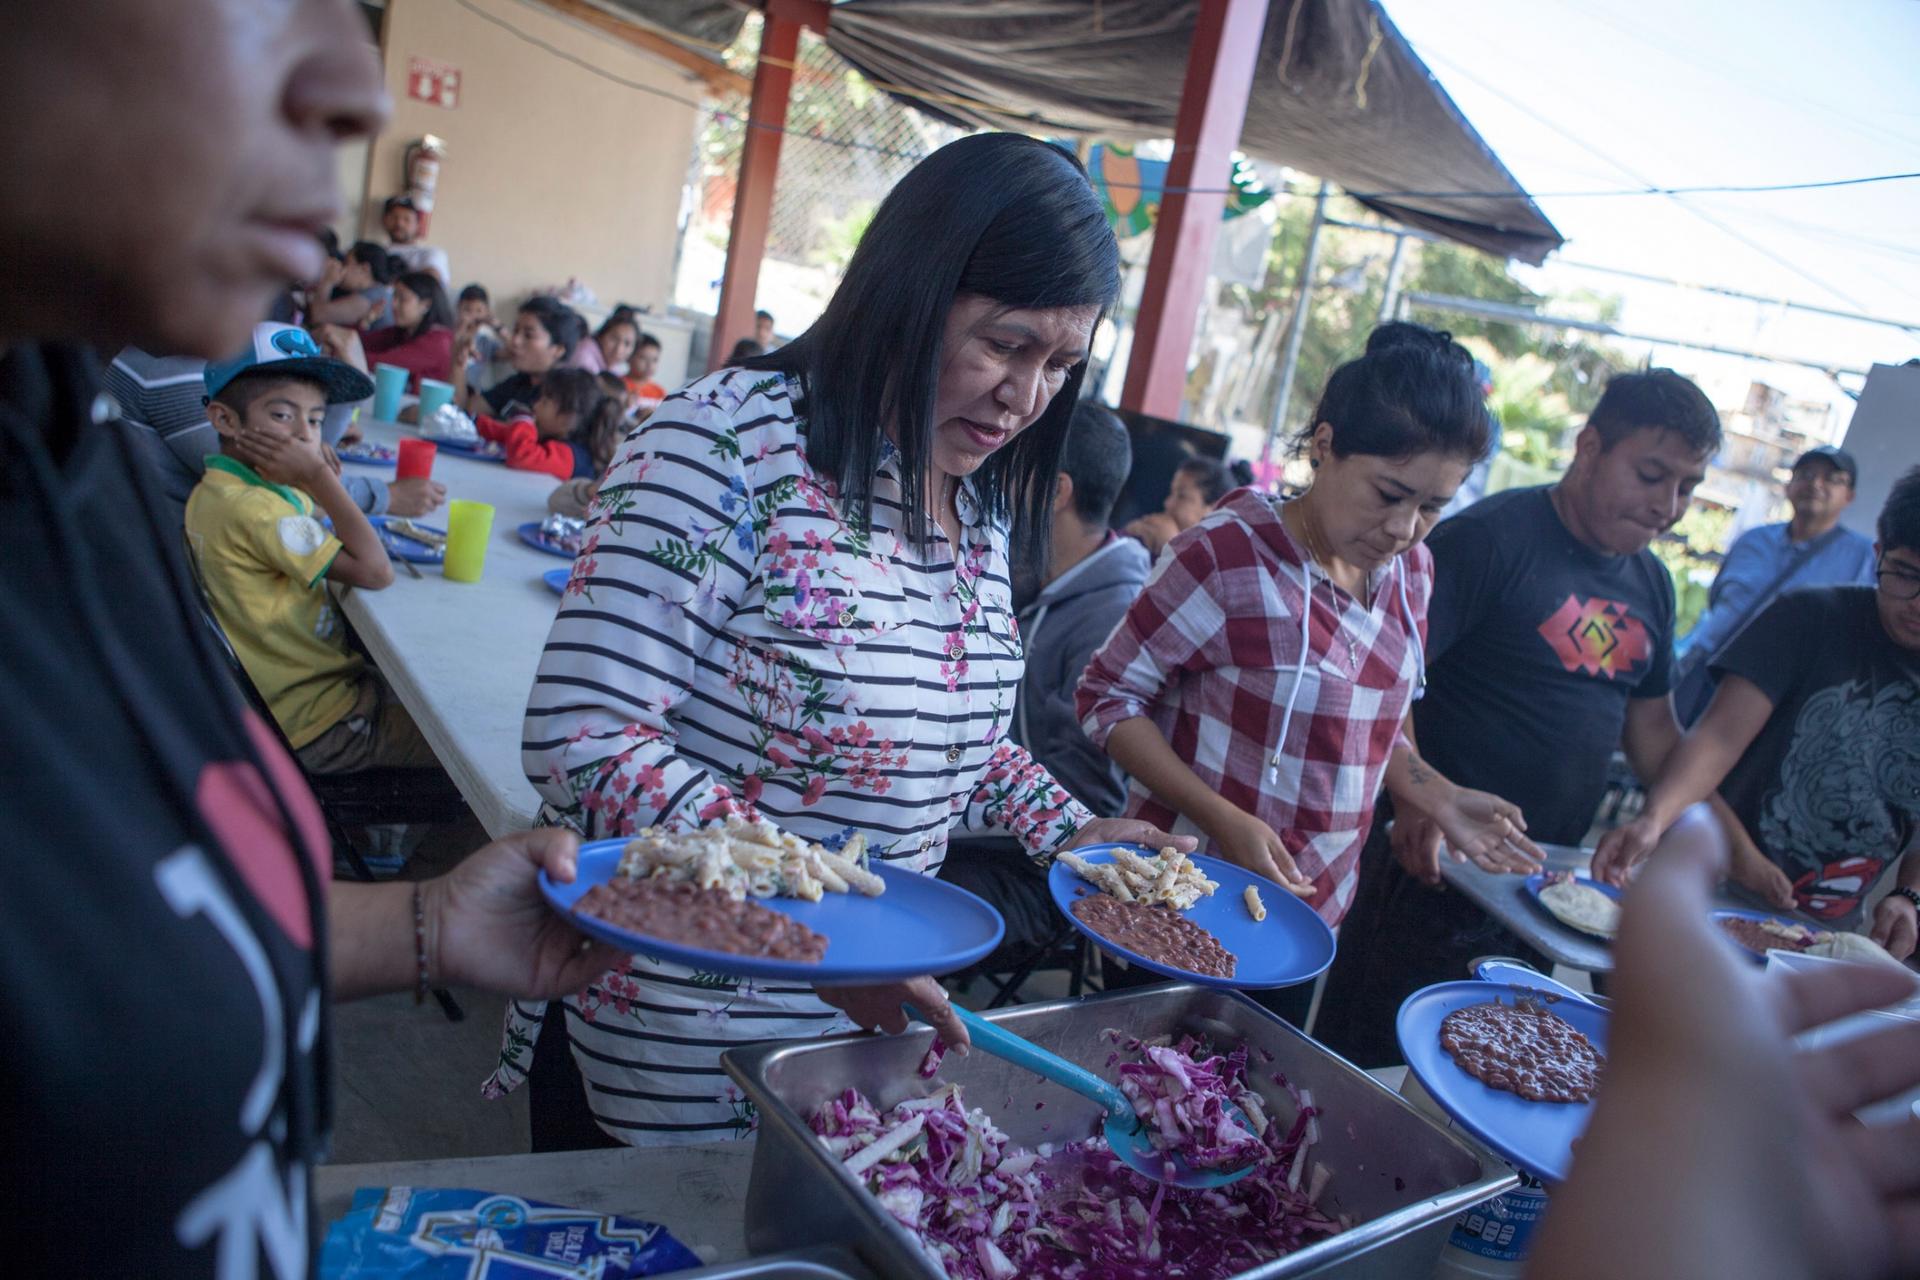 Families wait in line are shown in a serving line where several dishes are available in larger serving containers.